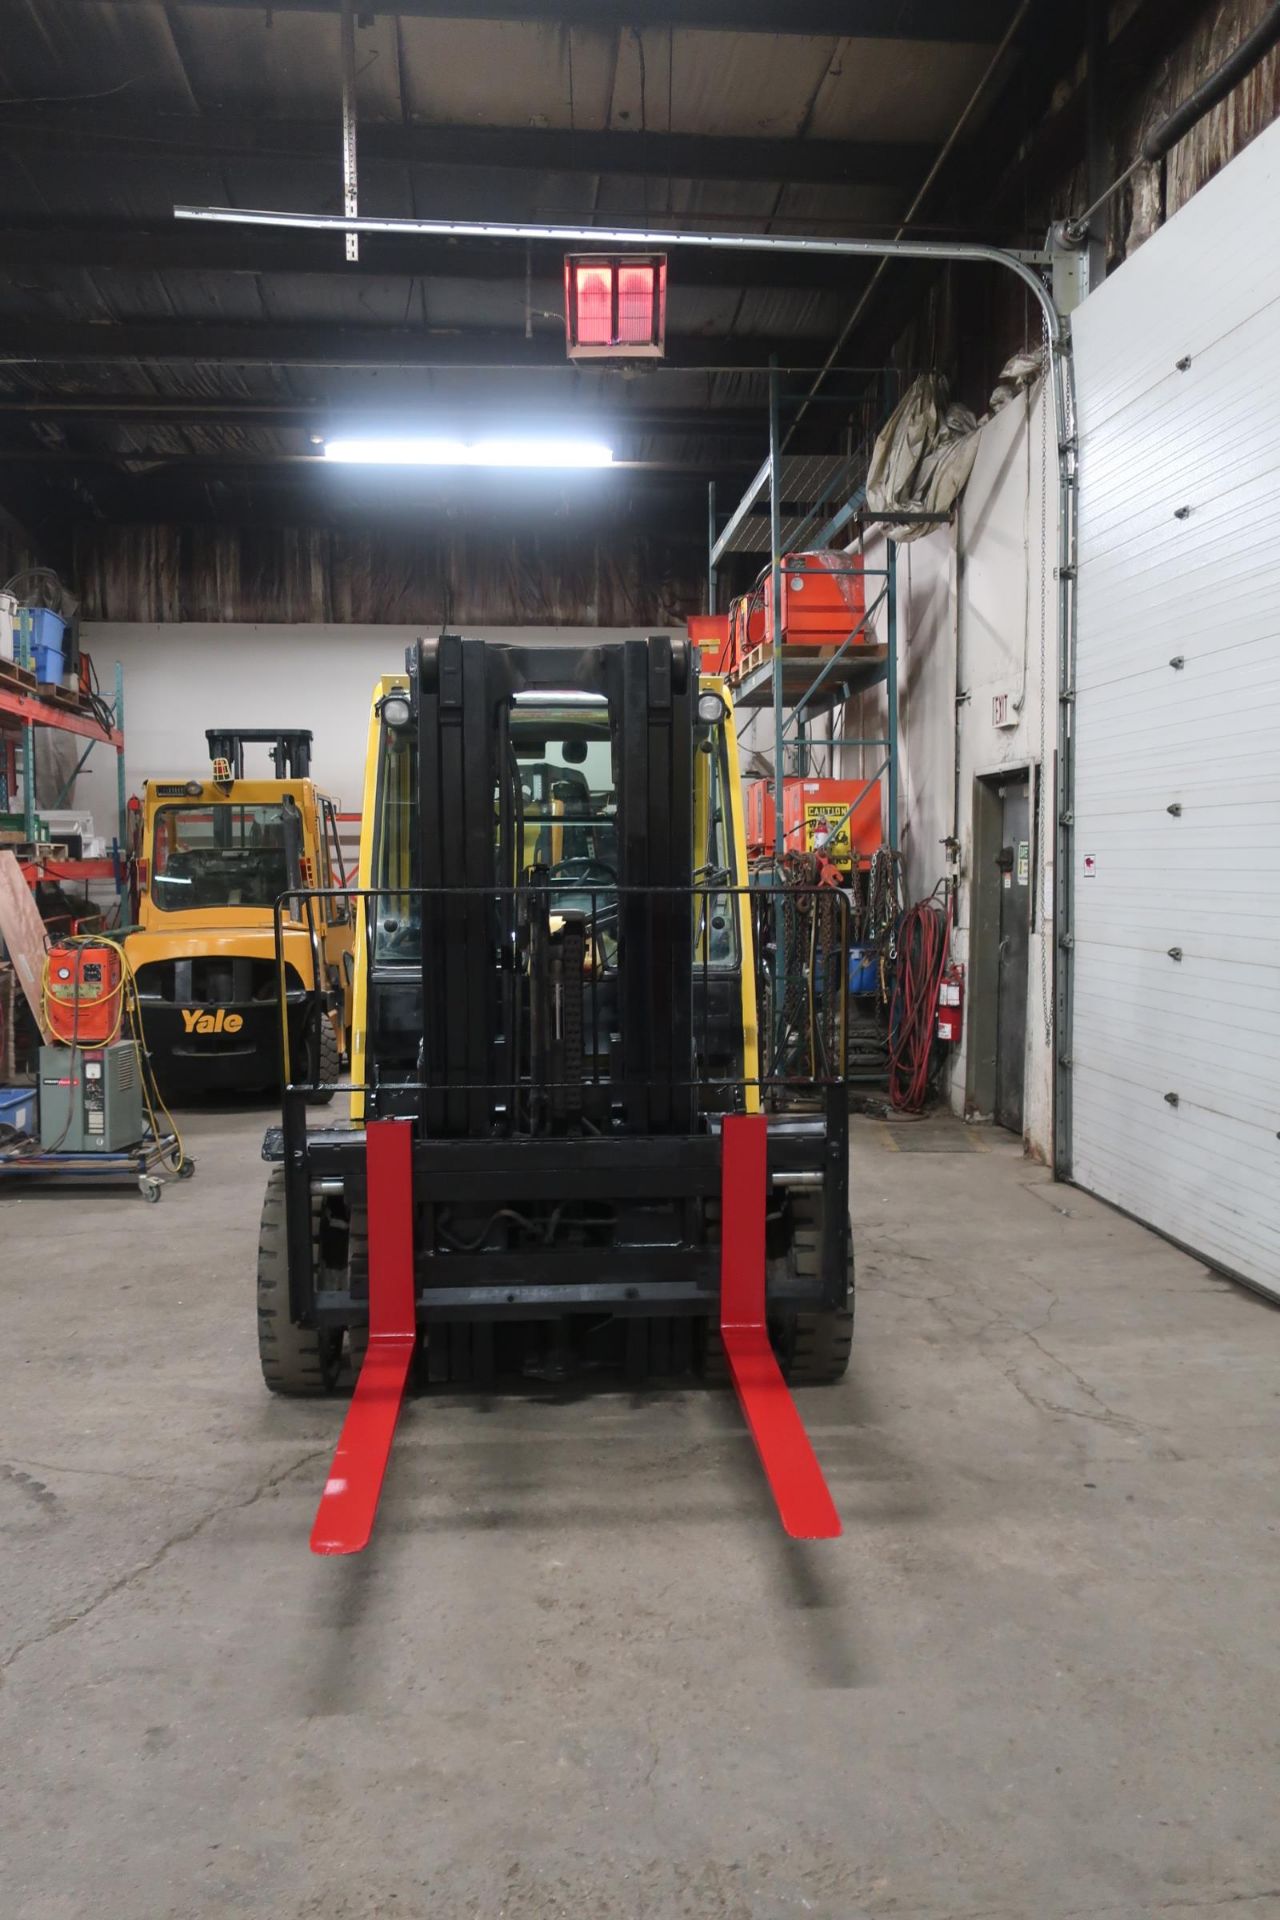 FREE CUSTOMS - 2007 Hyster 9,000lbs Capacity OUTDOOR Forklift Diesel DUAL FRONT TIRES and - Image 2 of 3